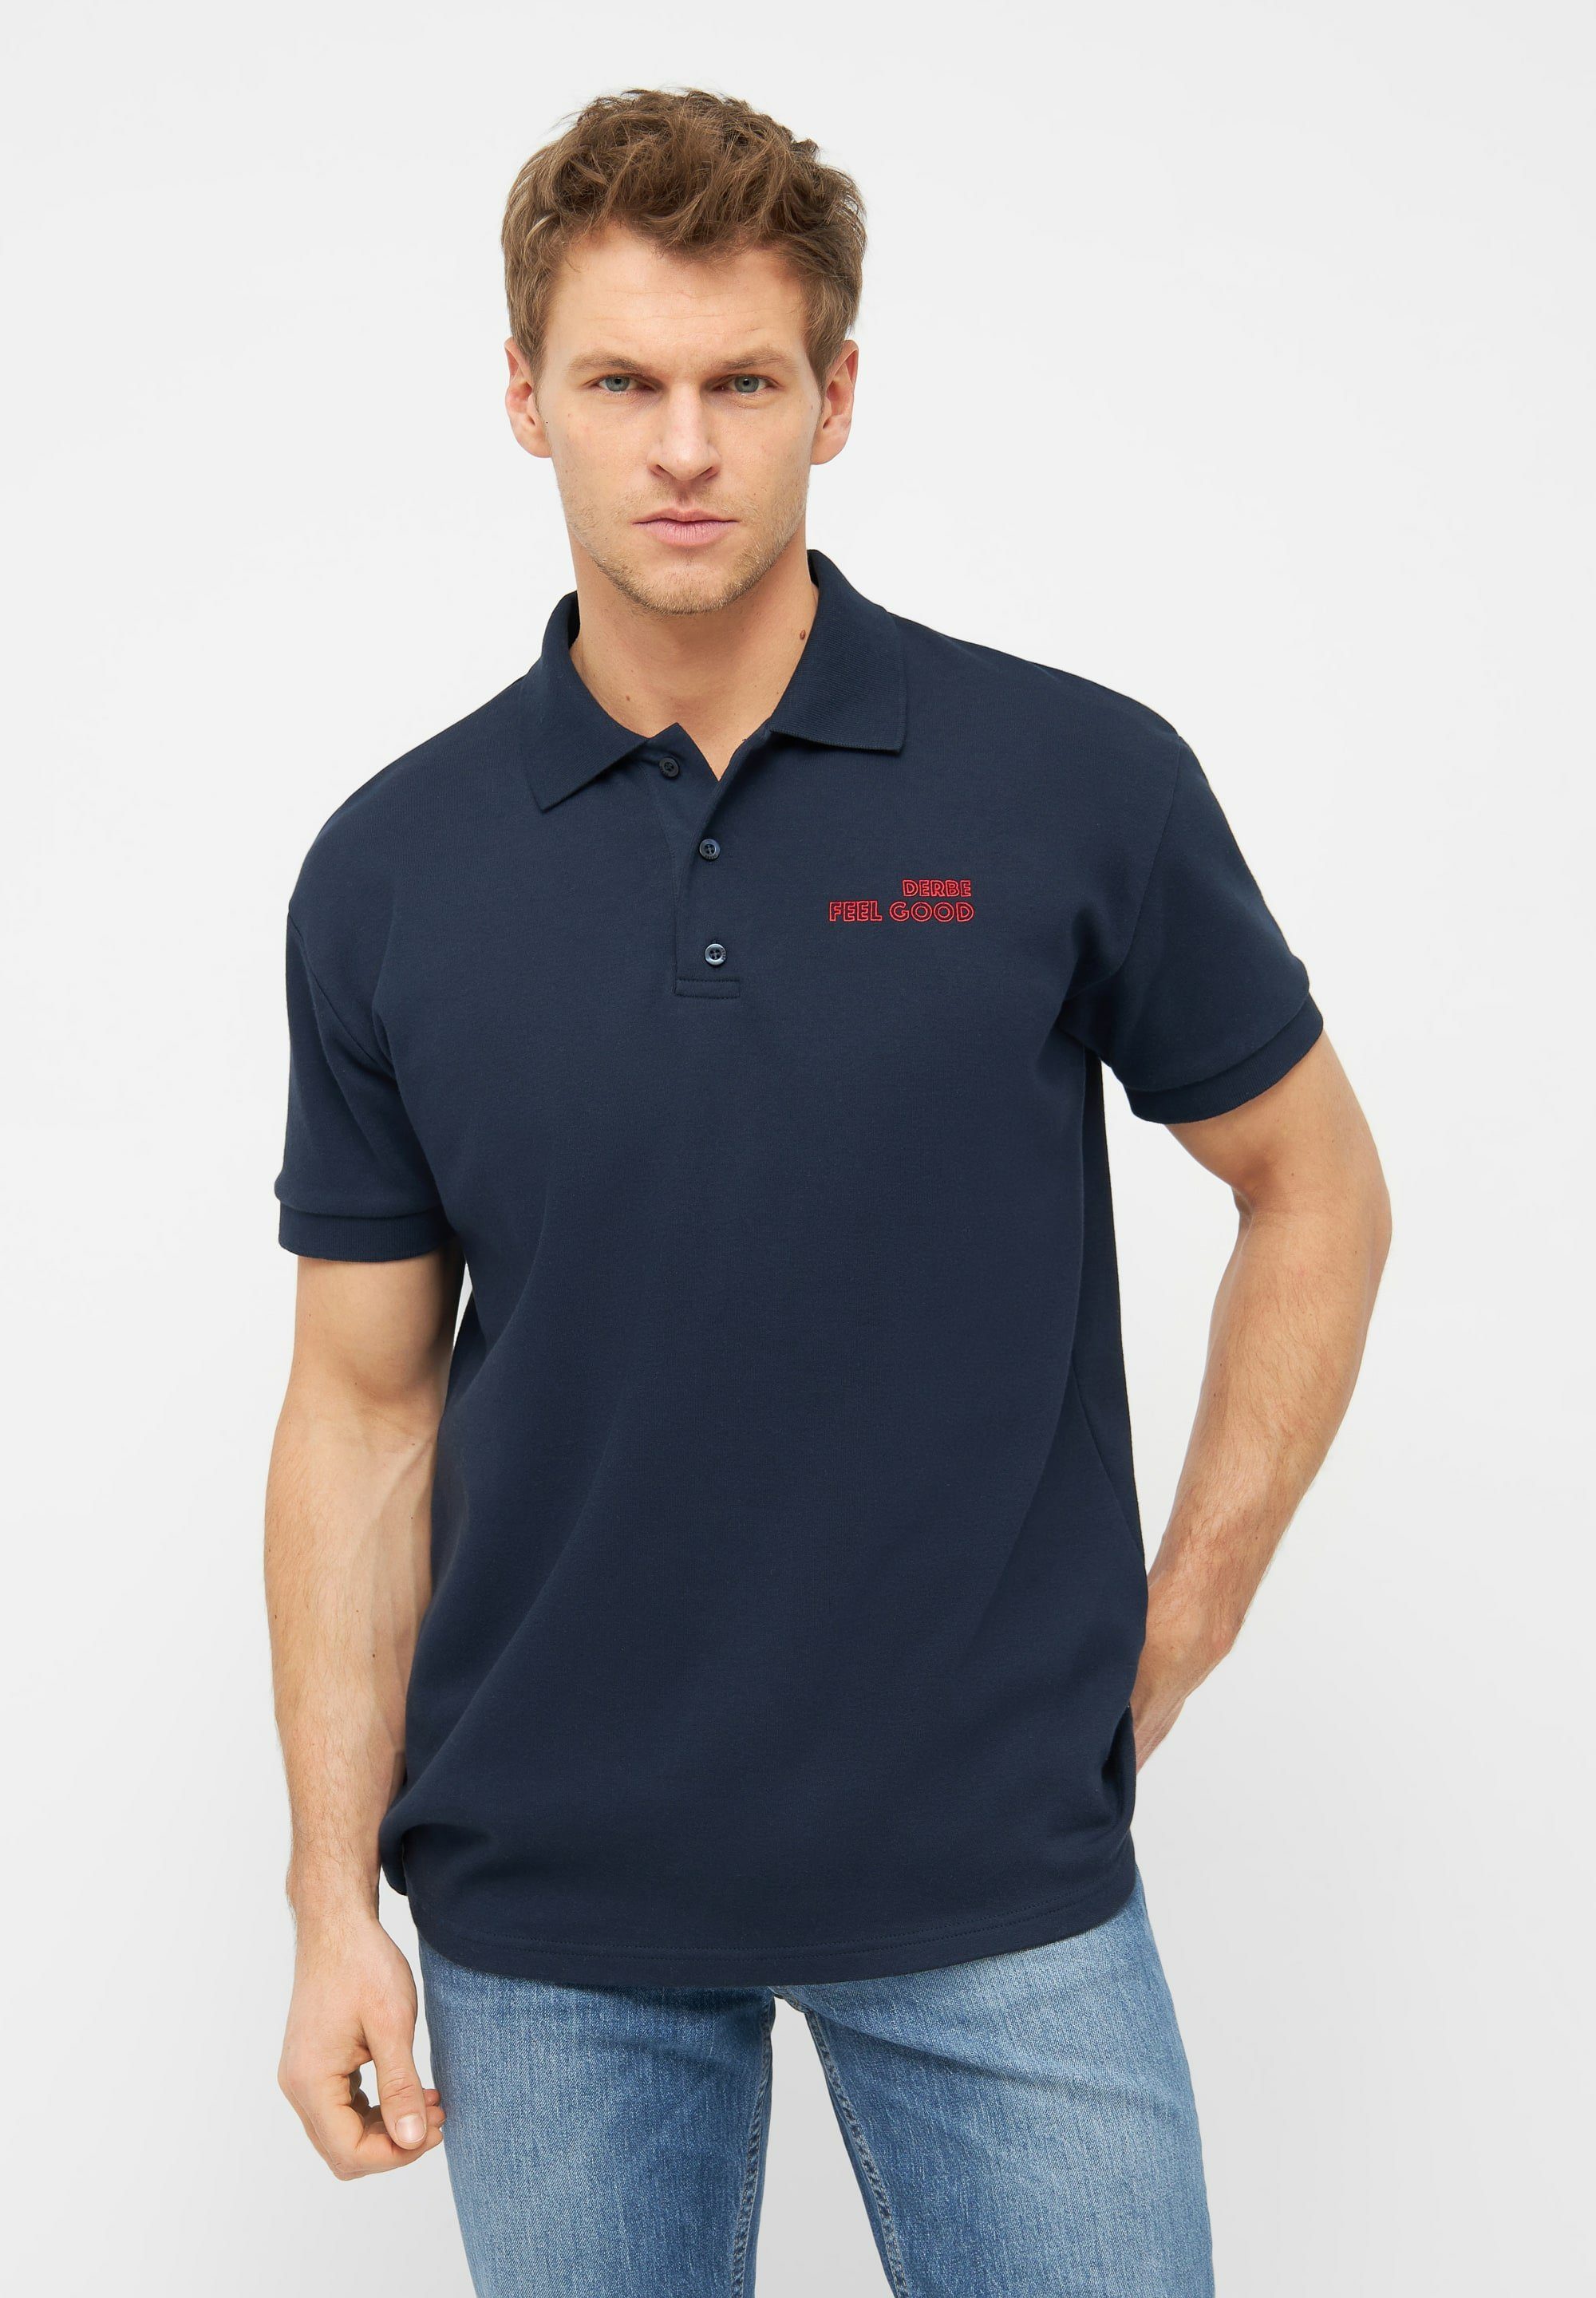 Derbe Poloshirt Good Portugal, tolle Made Qualität in Feel